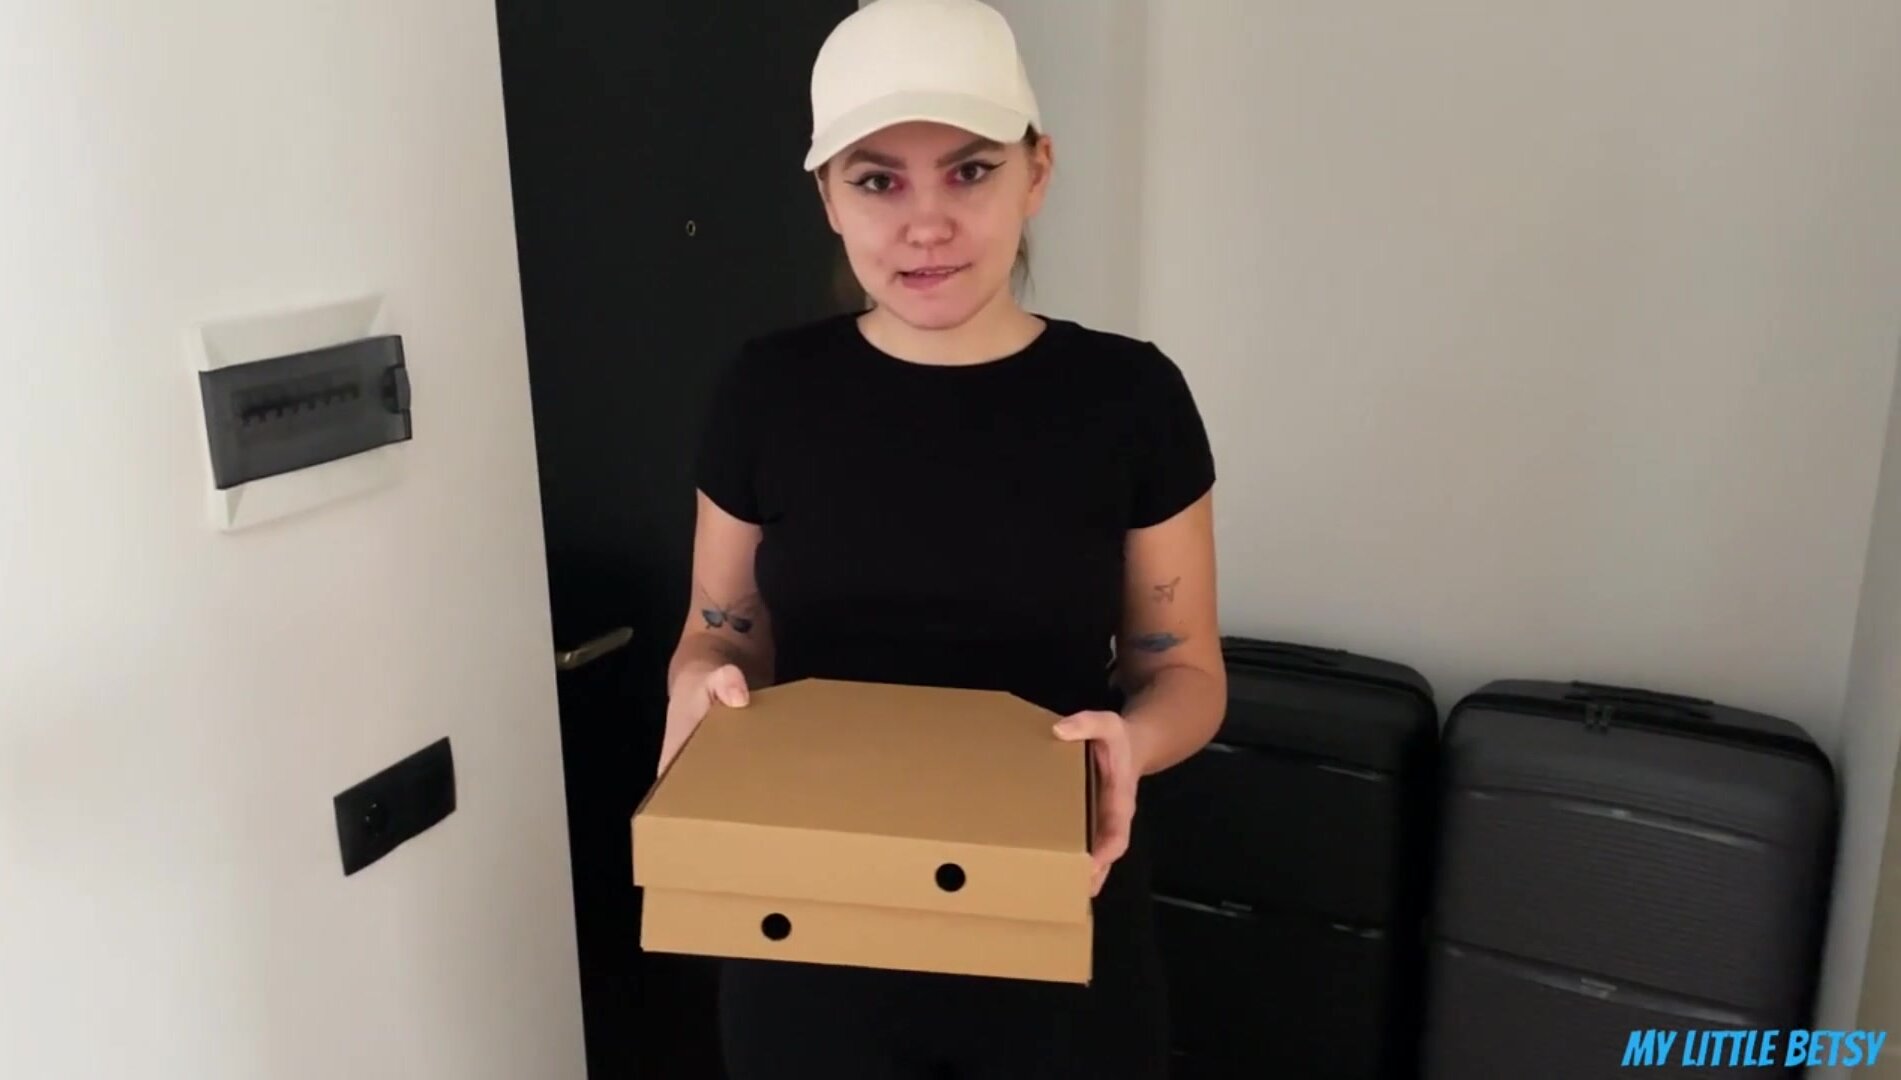 The Cute Courier Turned Out To Be A Pervert - Fucked Her And Cum In Her Mouth To Pay For Pizza